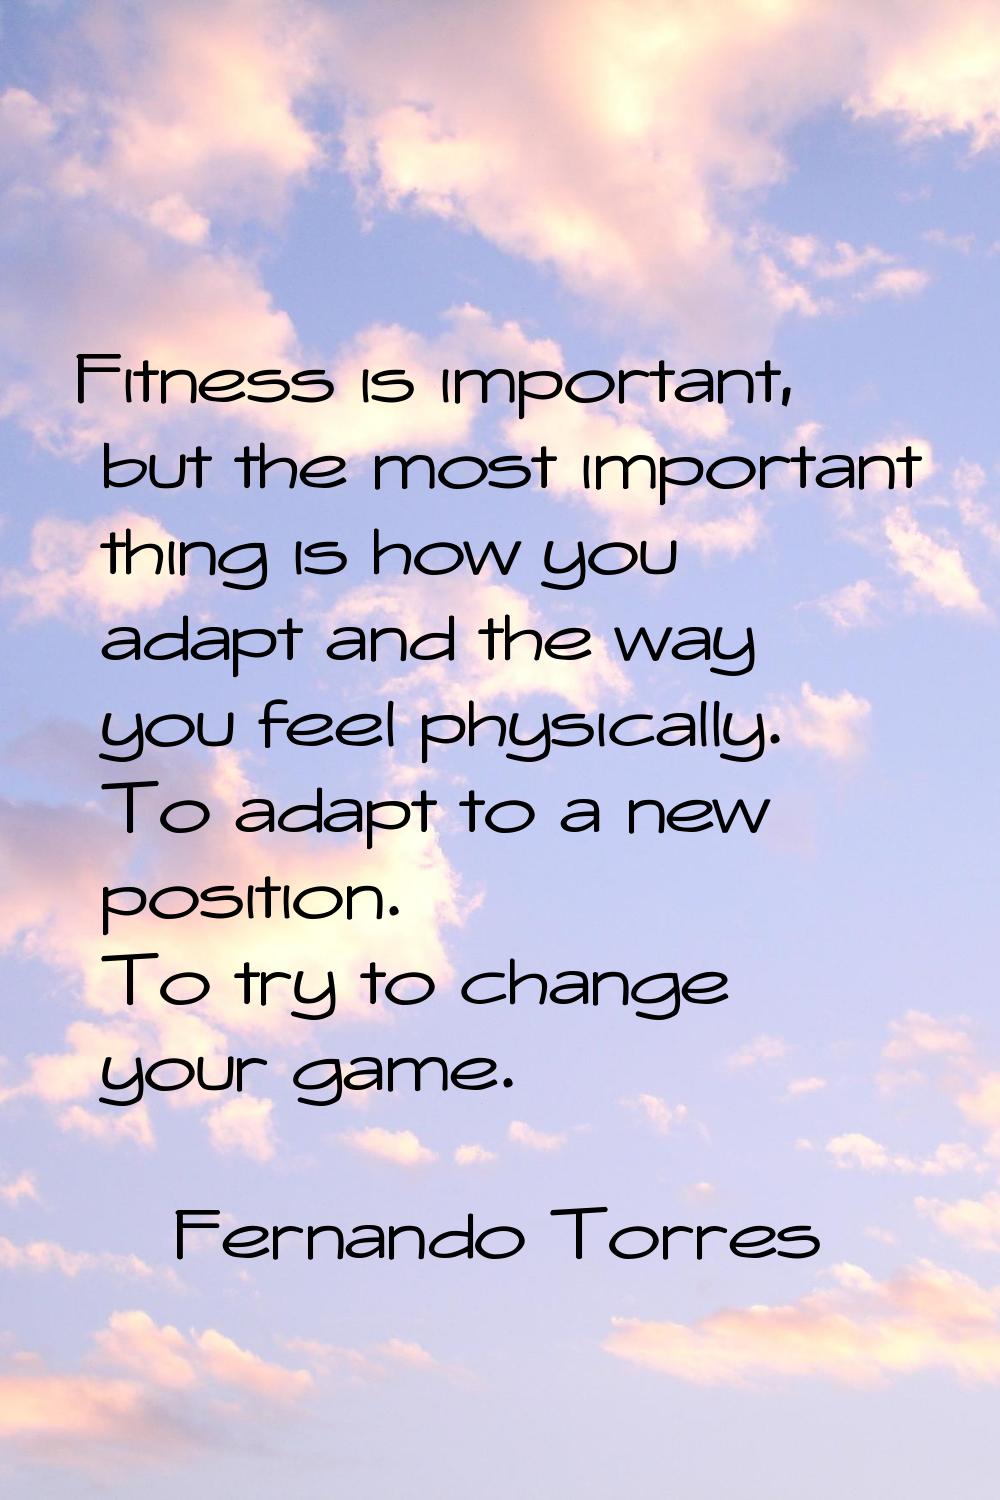 Fitness is important, but the most important thing is how you adapt and the way you feel physically